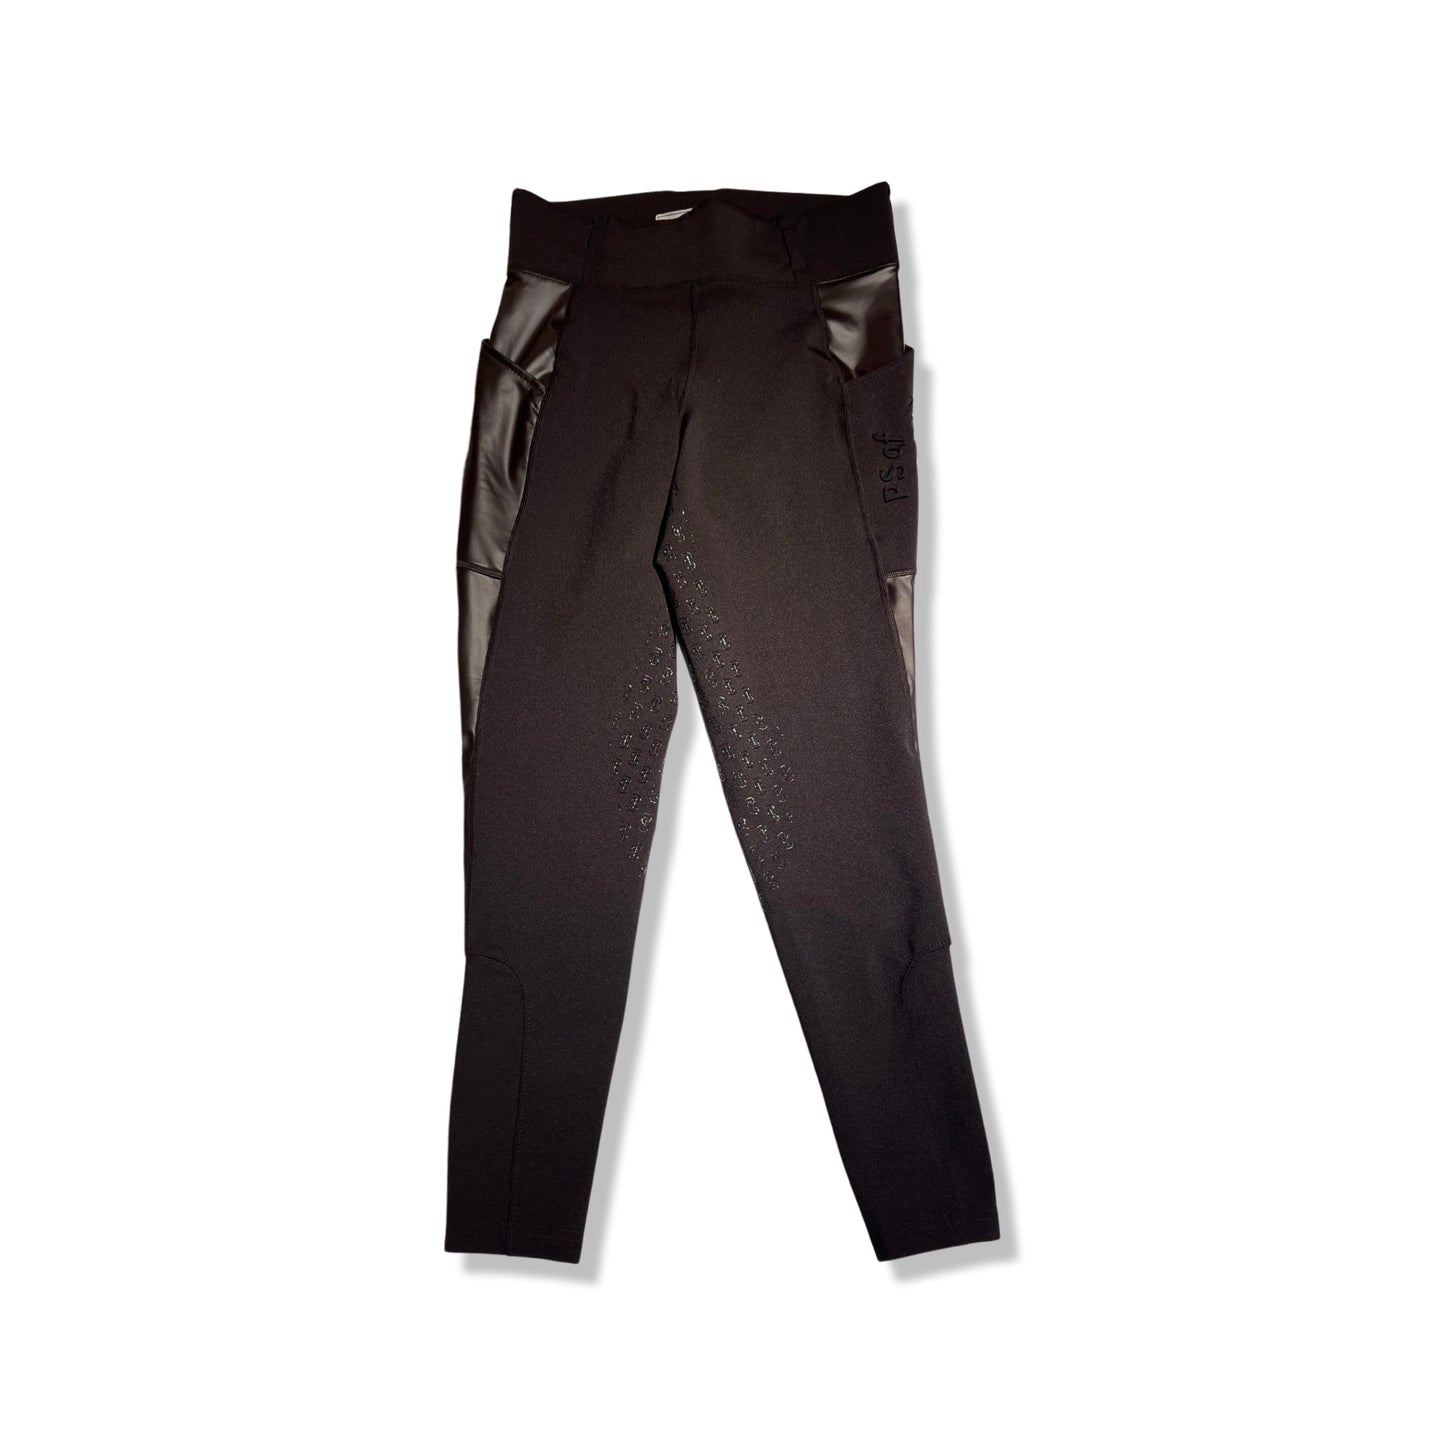 PS of Sweden Cindy Riding Breeches Ladies 40